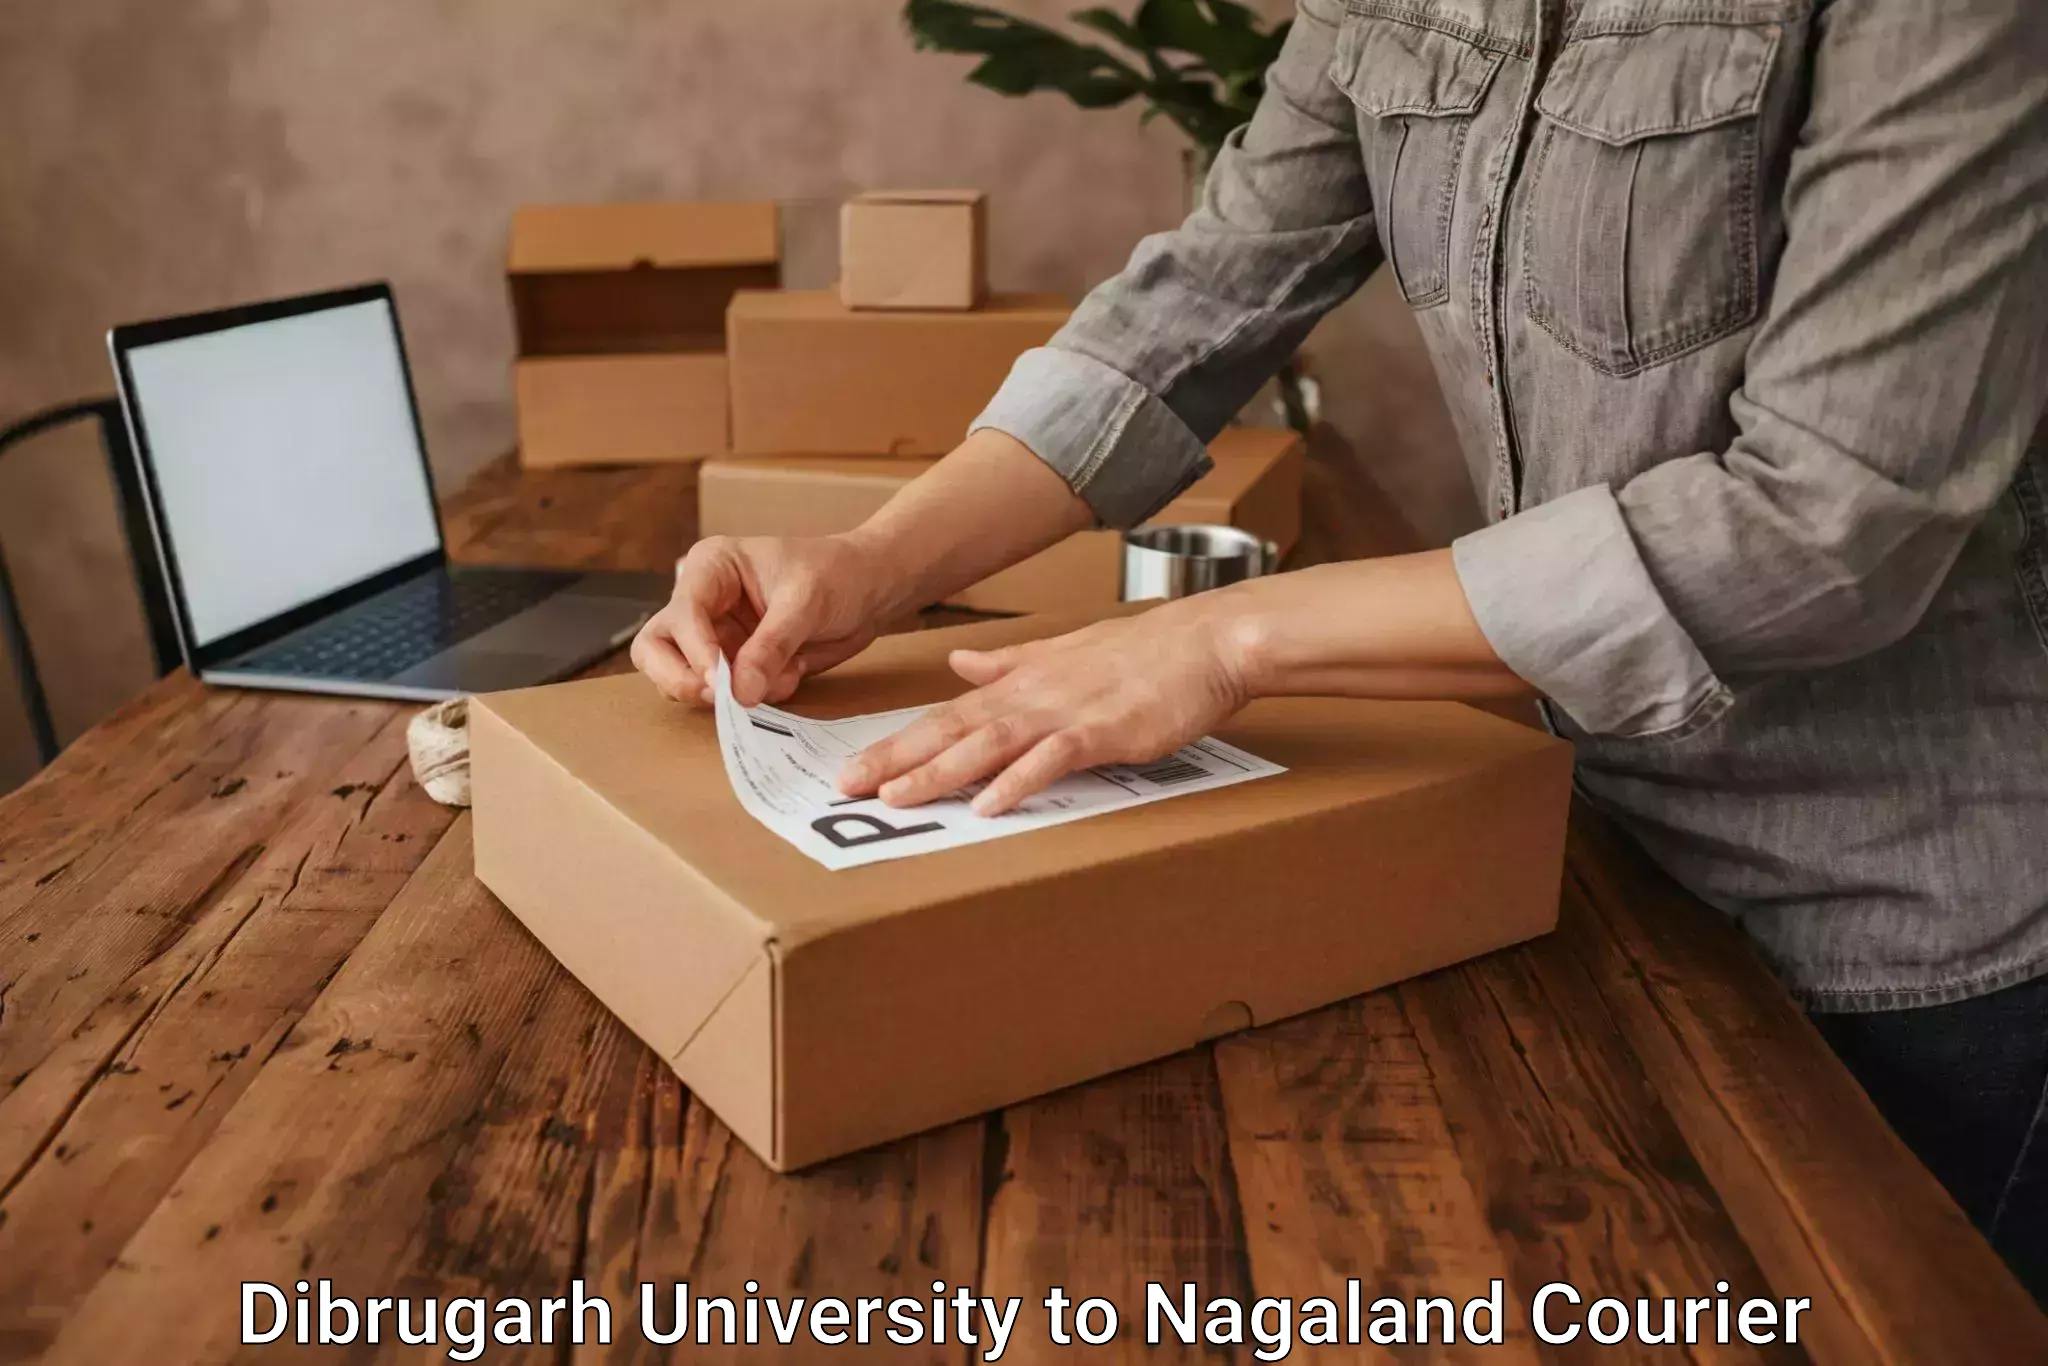 Modern delivery technologies Dibrugarh University to Nagaland